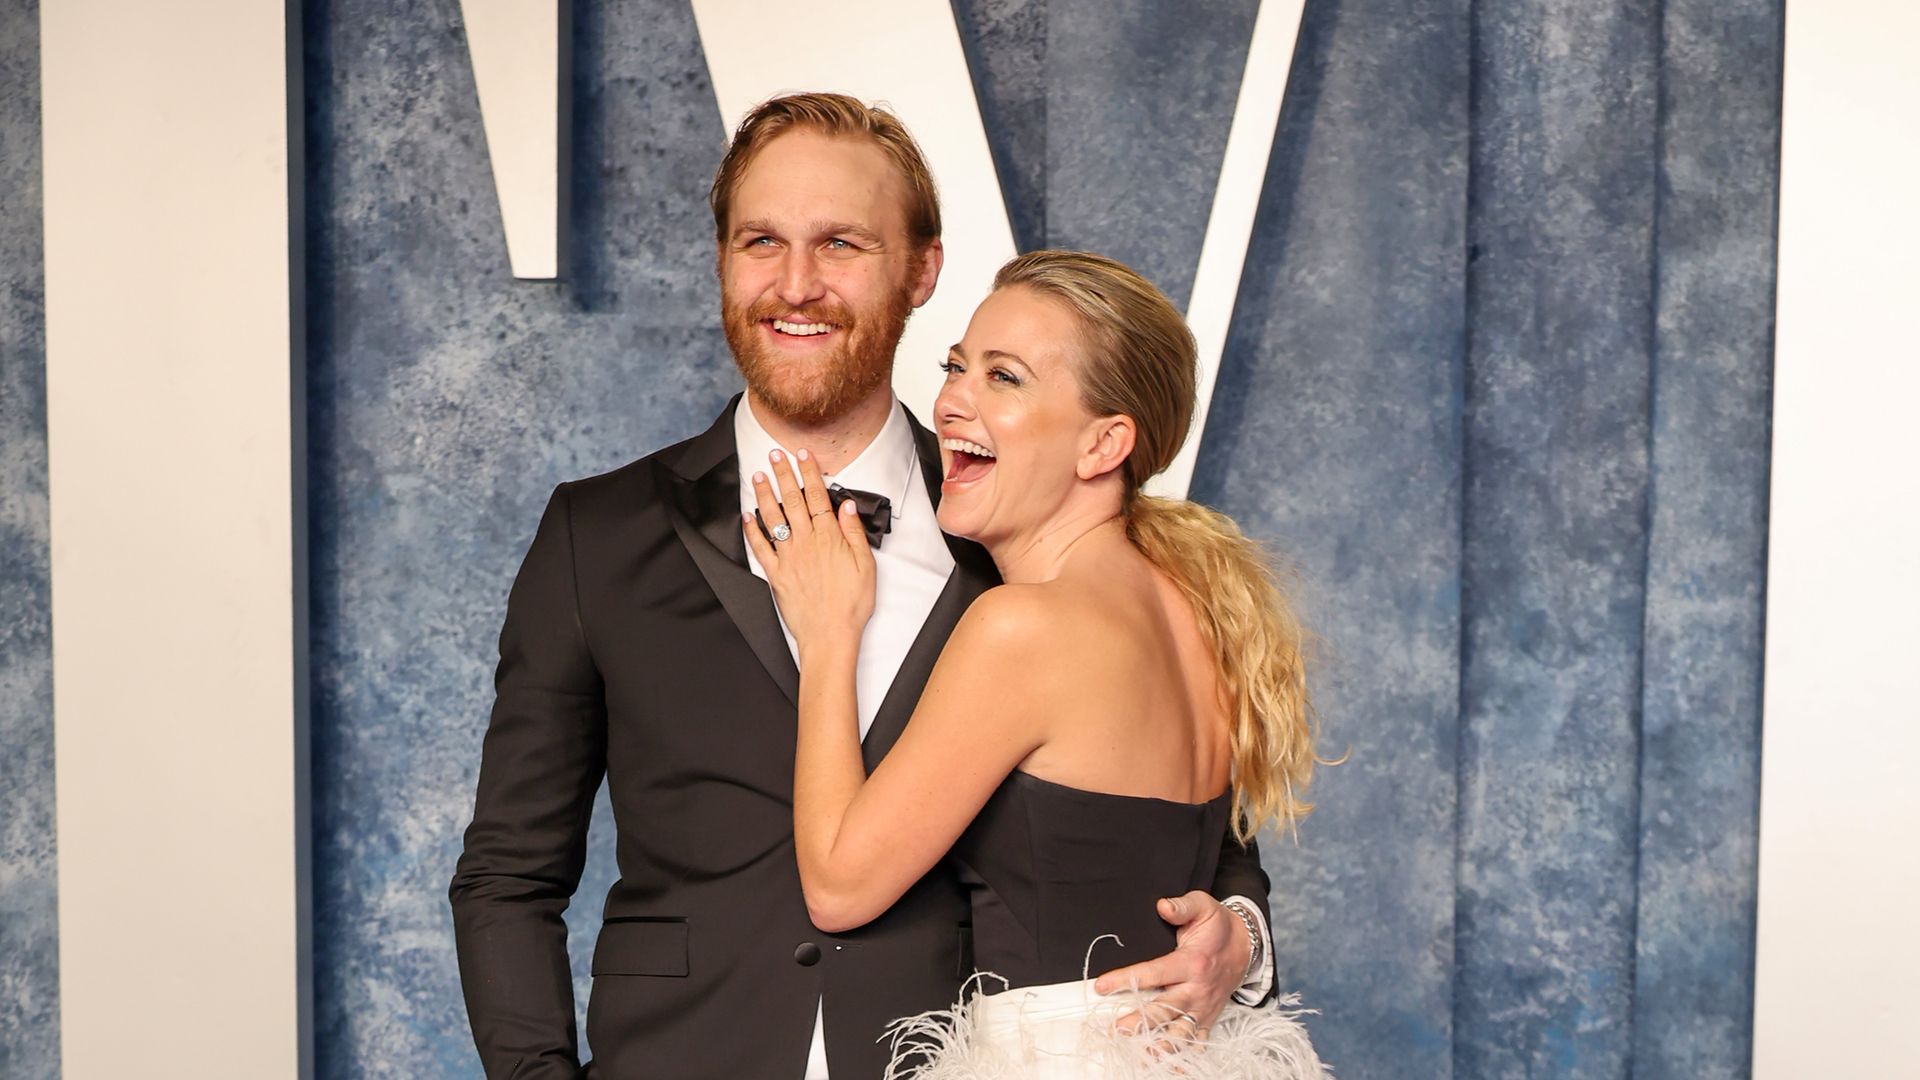 Wyatt Russell and Meredith Hagner attend the 2023 Vanity Fair Oscar Party Hosted By Radhika Jones at Wallis Annenberg Center for the Performing Arts on March 12, 2023 in Beverly Hills, California